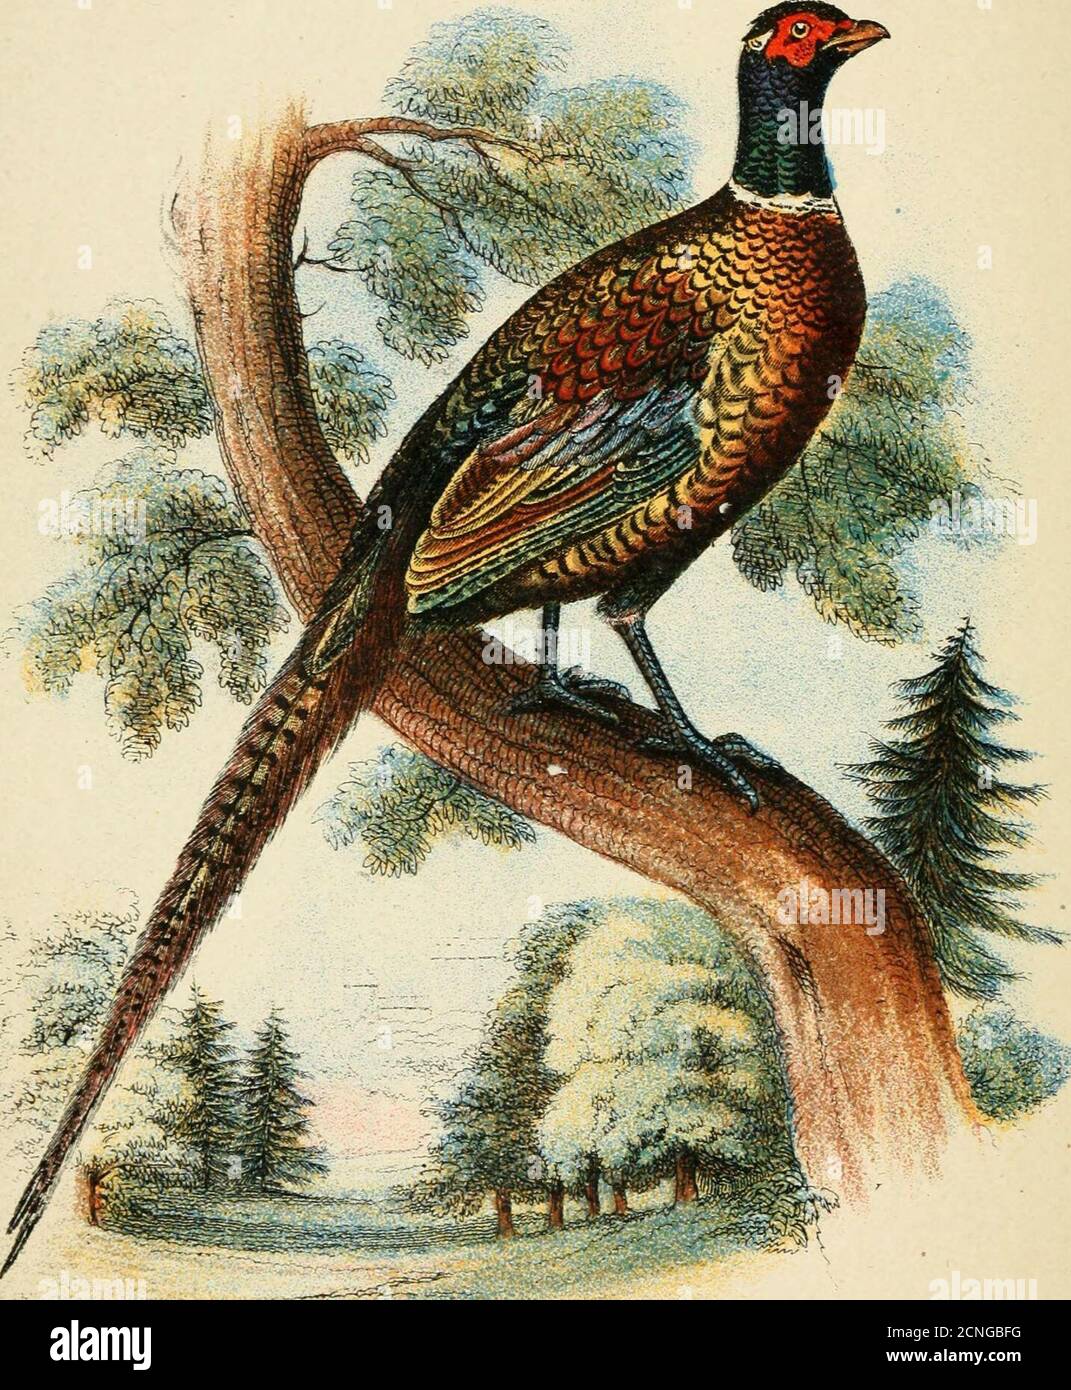 . A hand-book to the game-birds . ^-^ RING-NECKED PHEASANT. LLOYDS NATURAL HISTORY.Edited by R. Bowdler Sharpe, LL.D., F.L.S., &c A HAND-BOOK TO THE GAME-BIRDS. BY W. R. OGILVIE-GRANT, ZOOLOGICAL DEPARTMENT, BRITISH MUSEUM. VOL. IL PHEASANTS {Continued), MEGAPODES, CURASSOWS,HOATZINS, BUSTARD-QUAILS. LONDON: EDWARD LLOYD, LIMITED,12, SALISBURY SQUARE, FLEET STREET. 1897. PRINTED BYWYMAN AND SONS, LIMITED. 5&lt;^,S(^ MAR 2 9 1957 PREFACE. I TPiiNK that there can be no question as to the value of Mr.Ogilvie-Grants volumes on the Game-Birds, and I can testifyto the care which he has bestowed on t Stock Photo